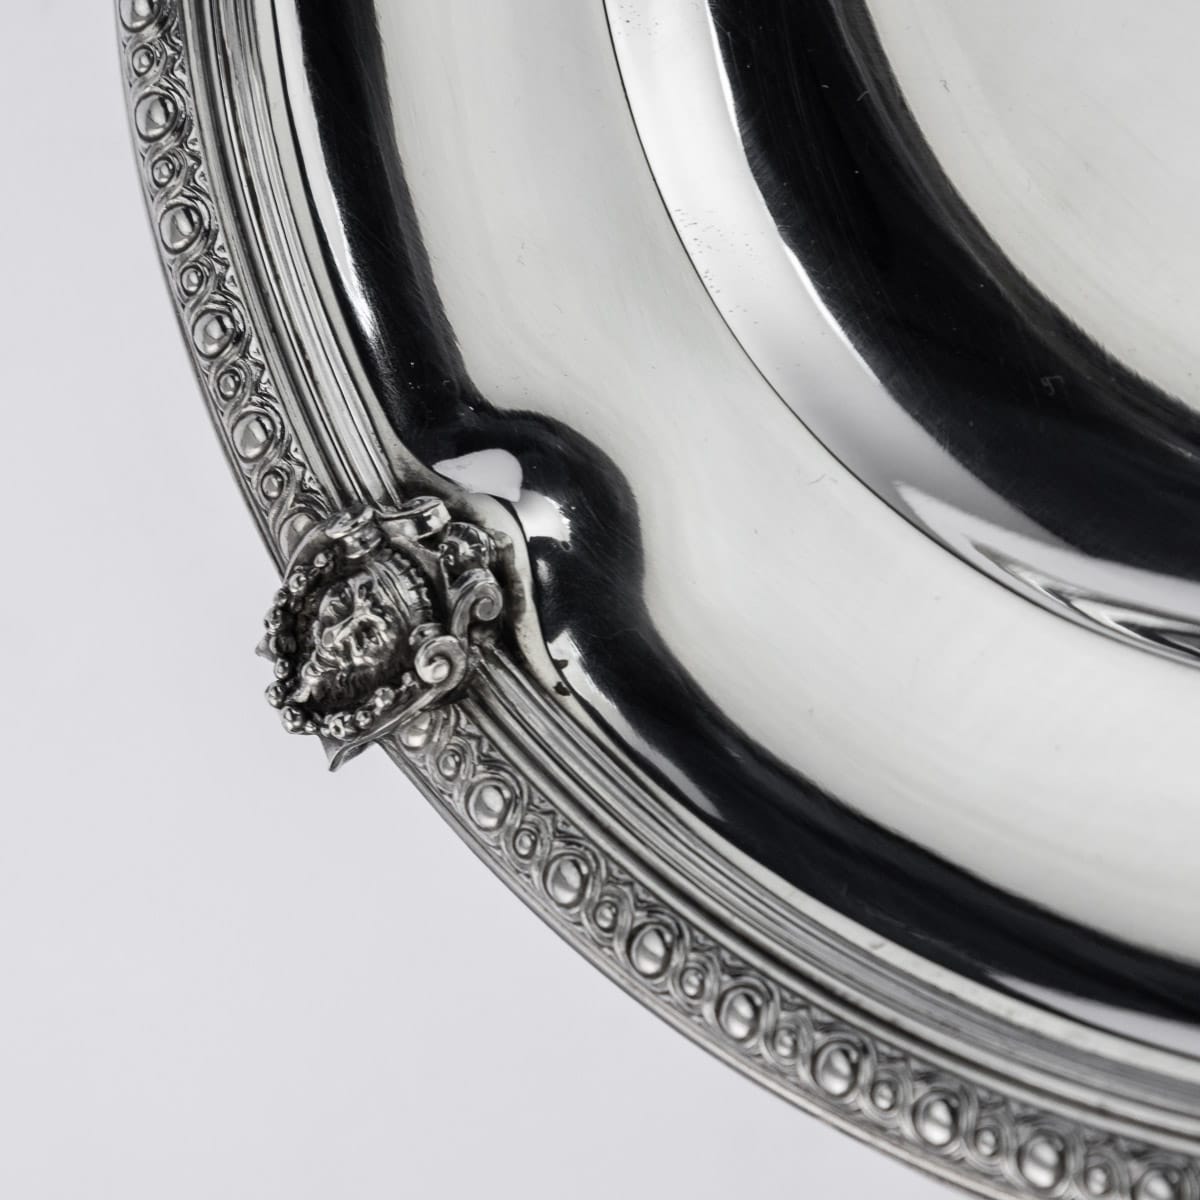 ODIOT: AN EXCEPTIONAL 19TH CENTURY SOLID SILVER FRENCH DINNER SERVICE, PARIS, C. 1890 - Image 13 of 22